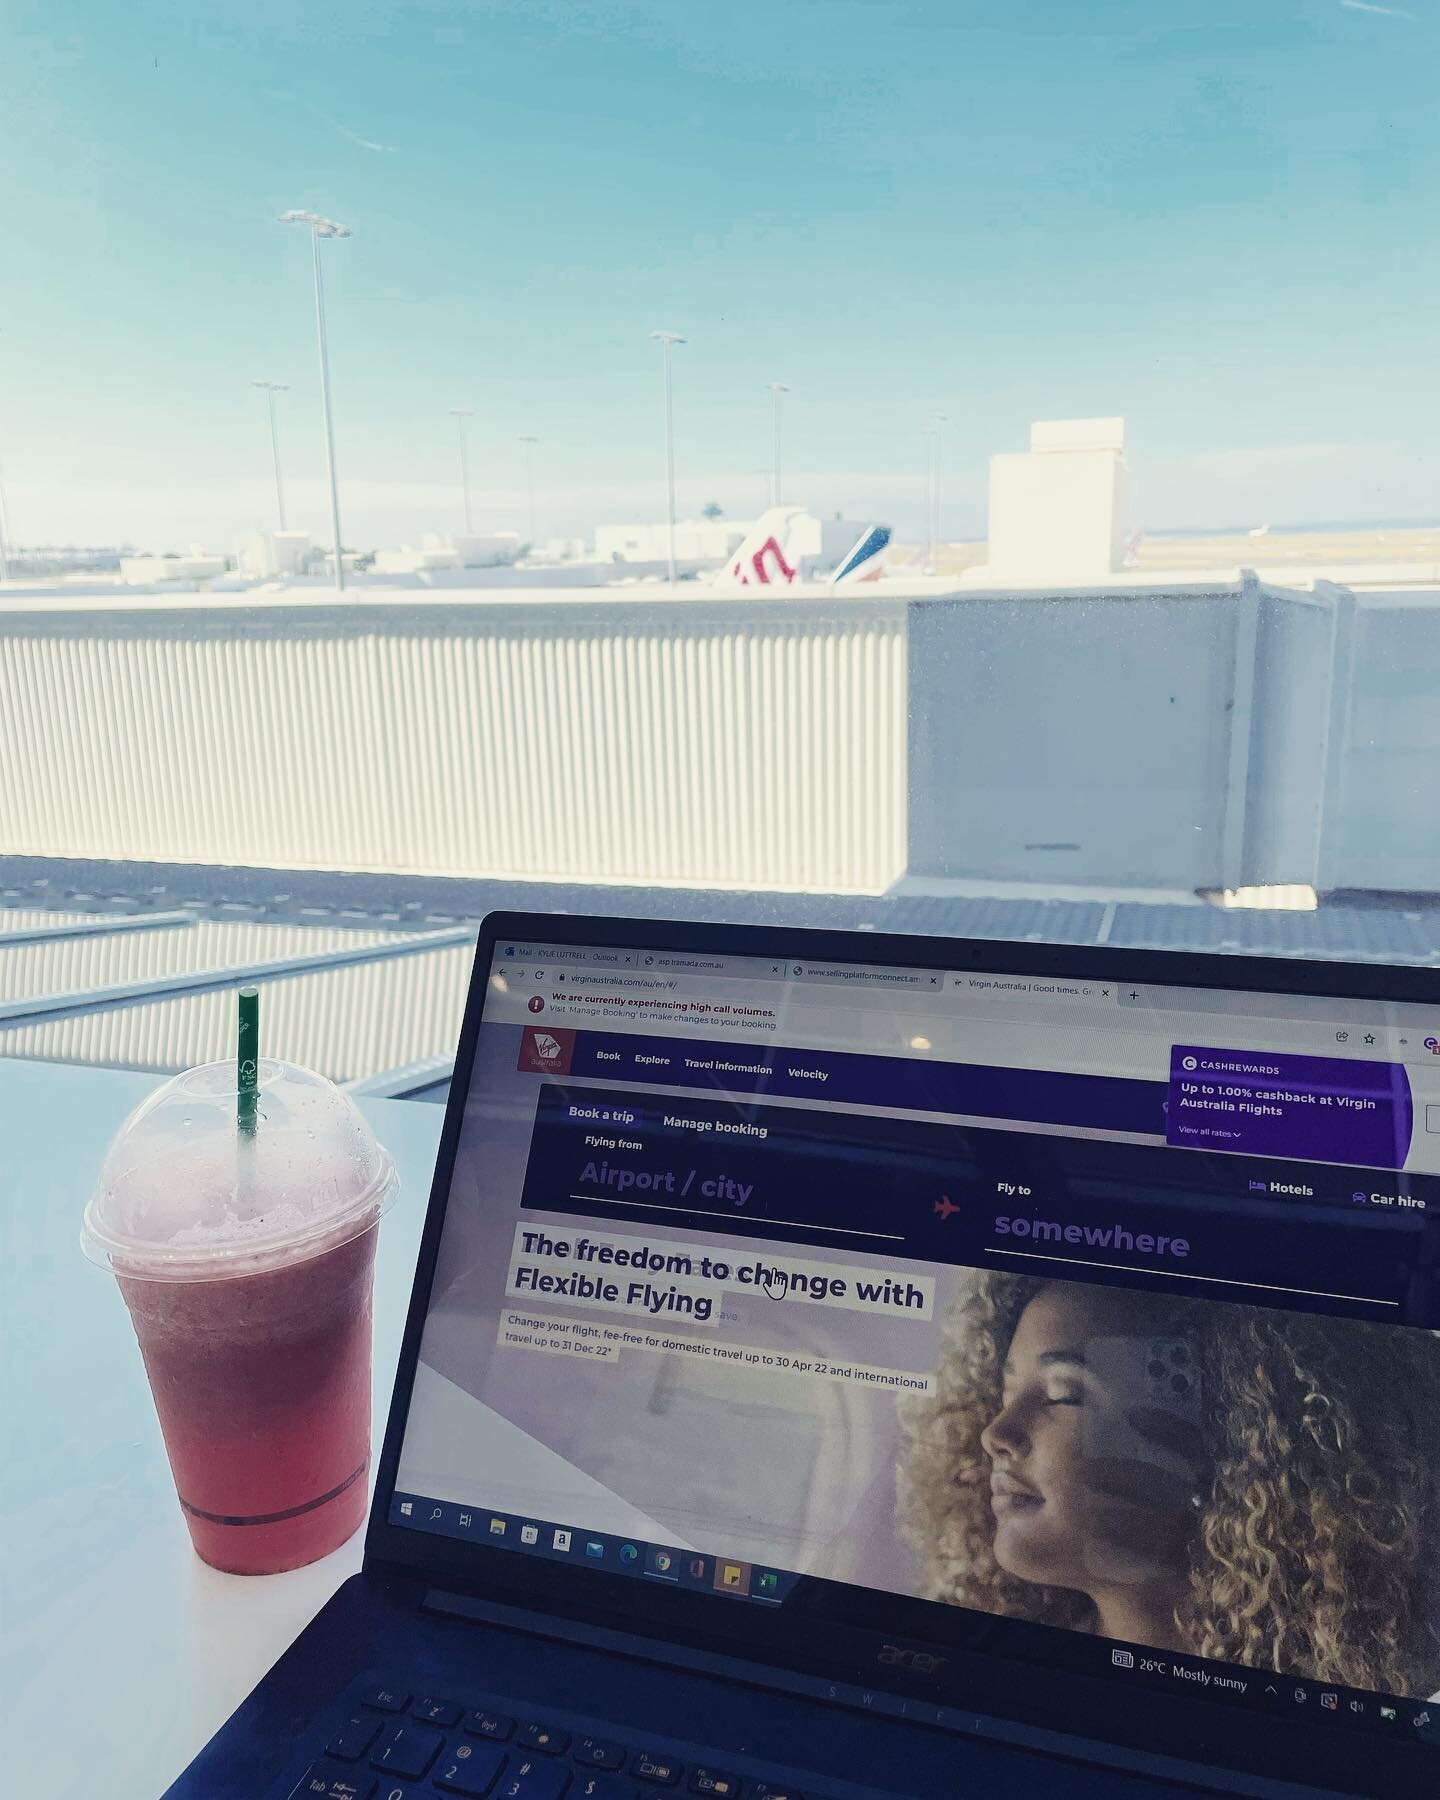 Todays office!
Flying from Sydney, so nice to be travelling again 🙌🏼
Busy day today, school holidays has finished and everyone wants to travel, exciting times!!!
Thank you Virgin for your hospitality, as always ❤️ ✈️ 
@virginaustralia